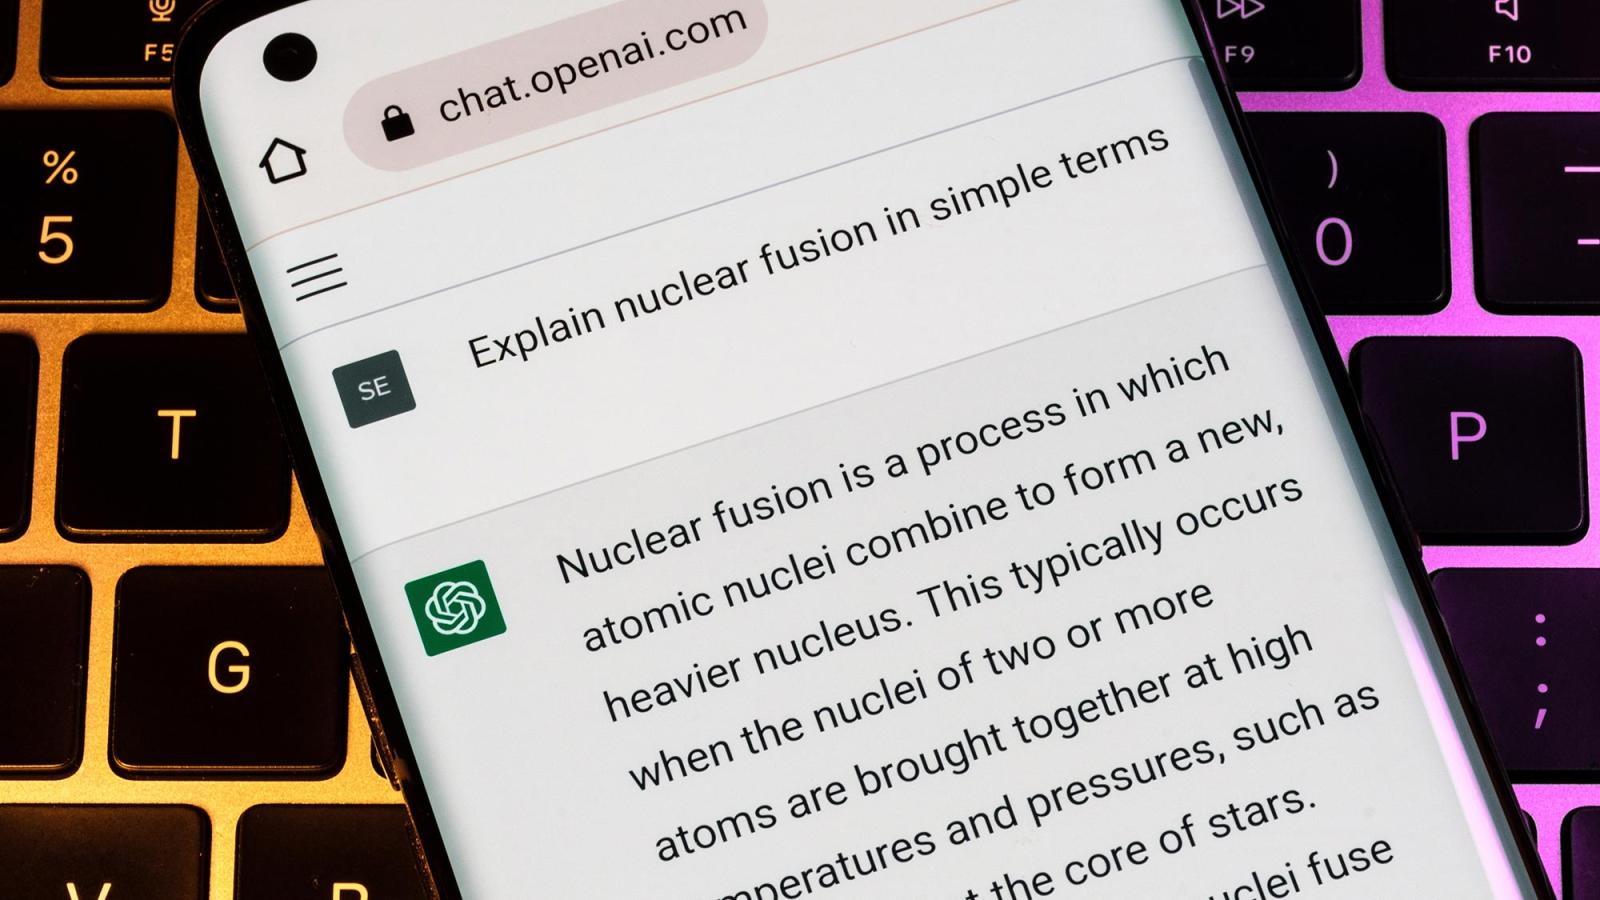 AI Chatbot ChatGPT providing answer to question about nuclear fusion, on a smartphone device 